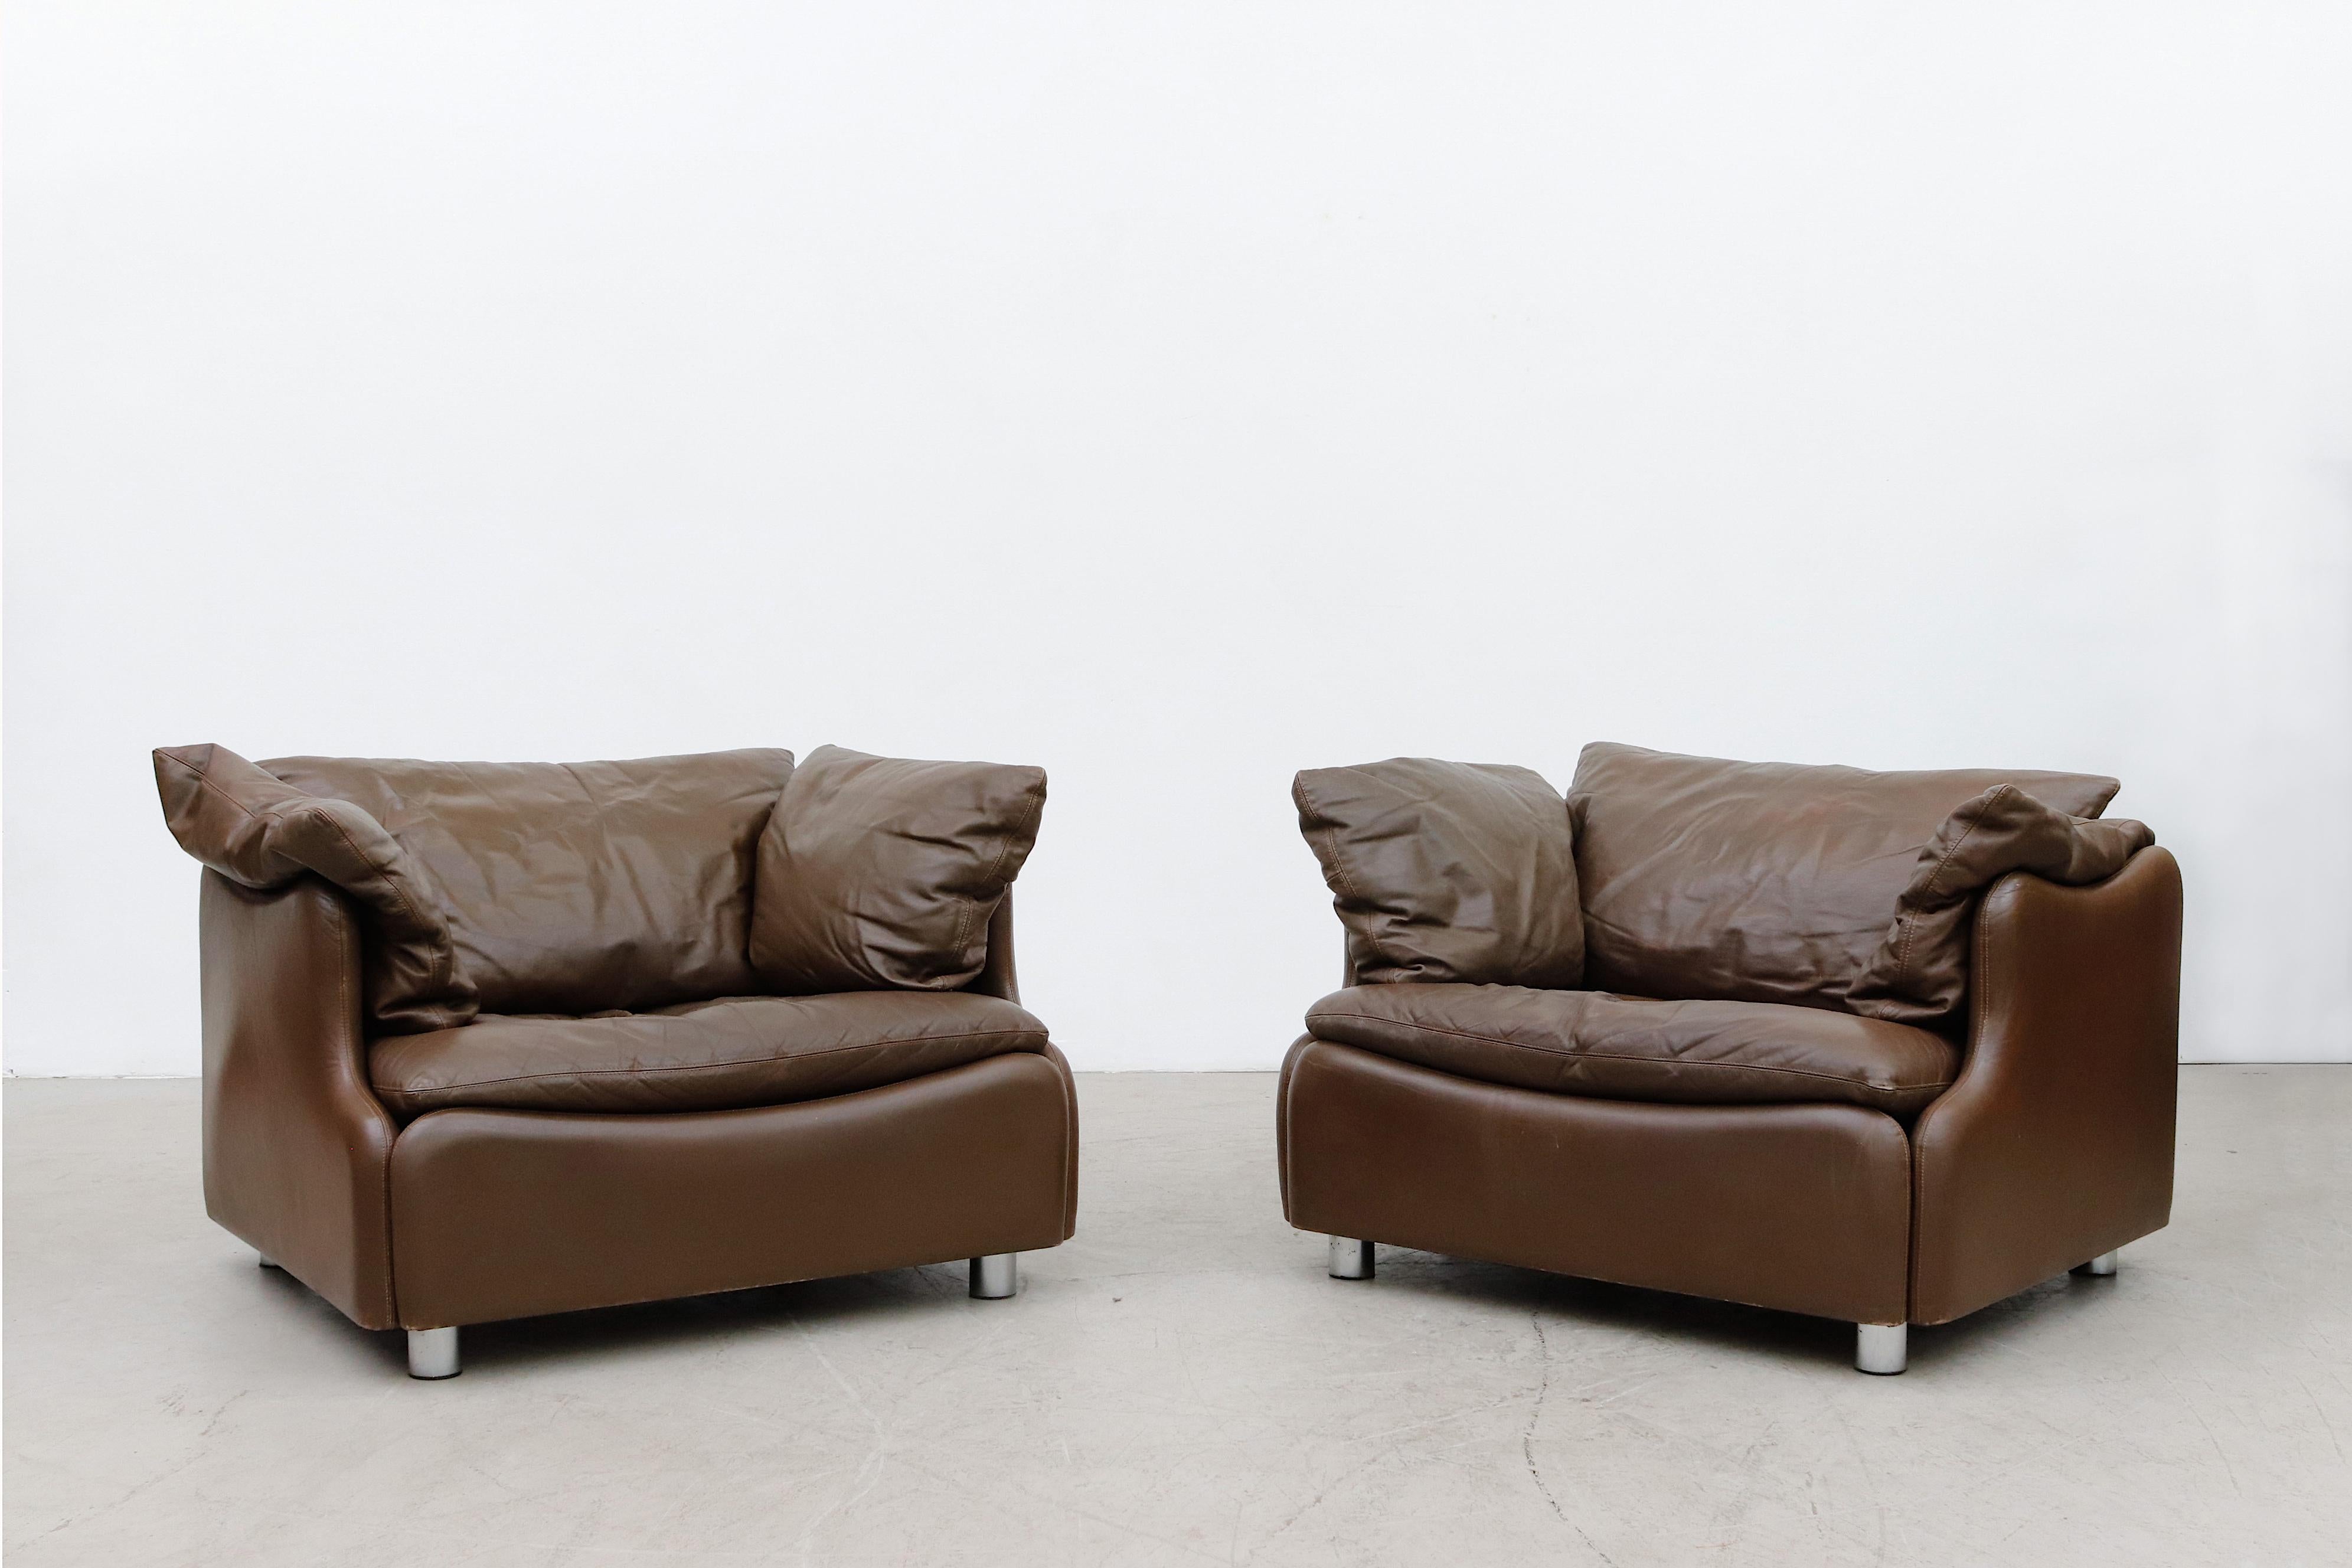 Pair of Leolux Wave Frame Lounge Chairs in Brown Leather. Beautifully made, In original condition, with some wear. Came from the original owner, with original receipt and catalog page. A matching 3 seater sofa also available and listed separately